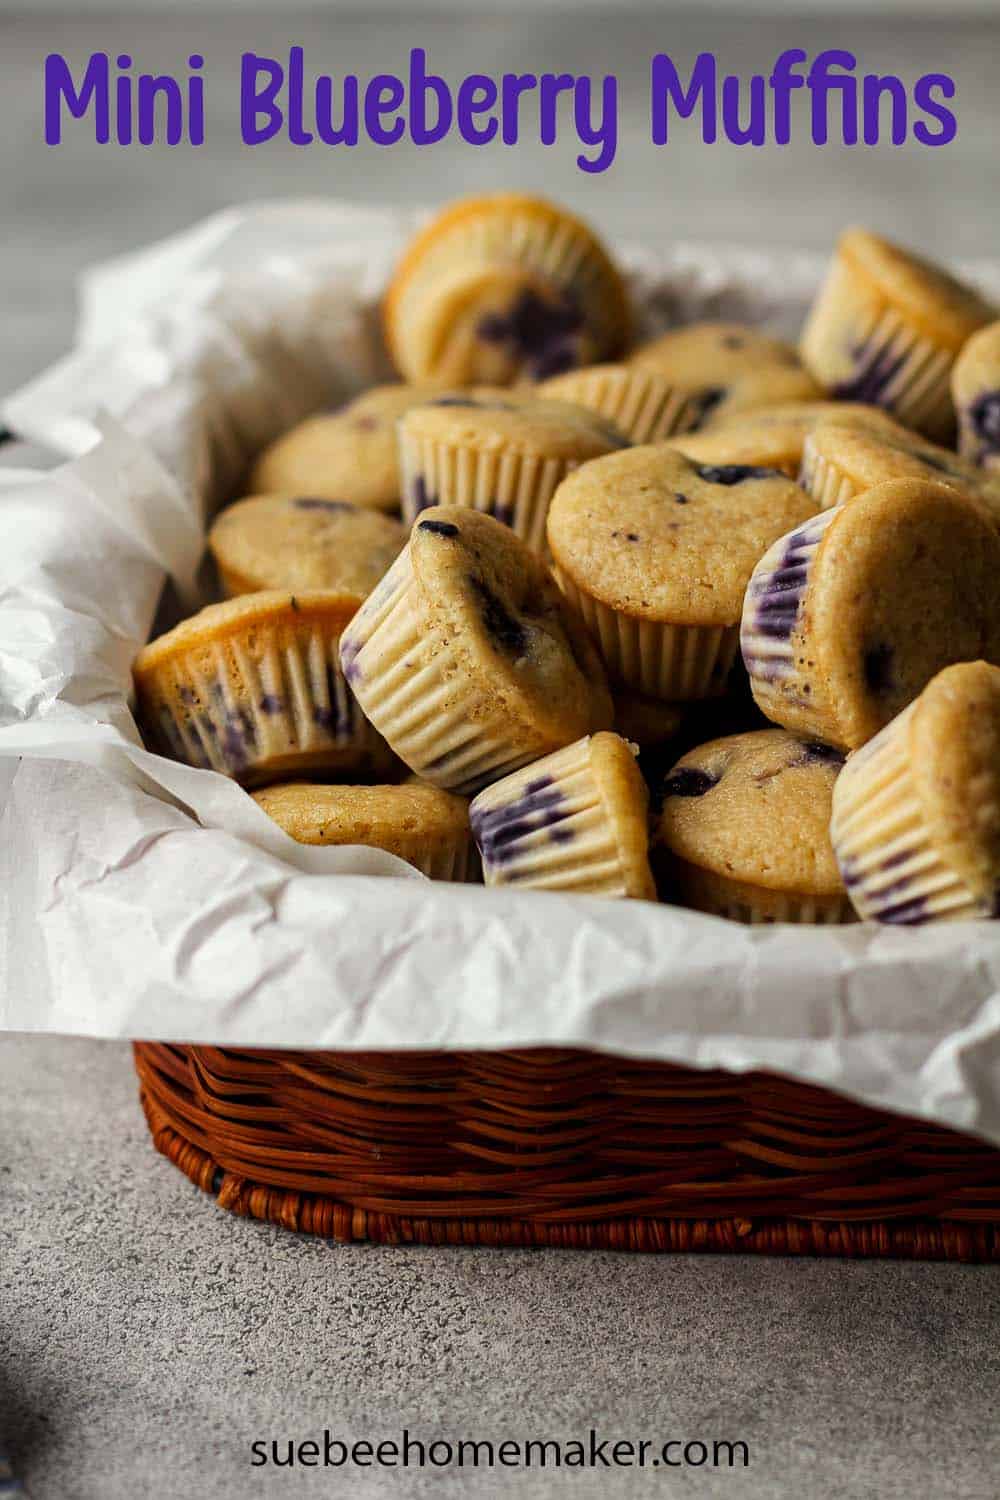 A basket of mini blueberry muffins.